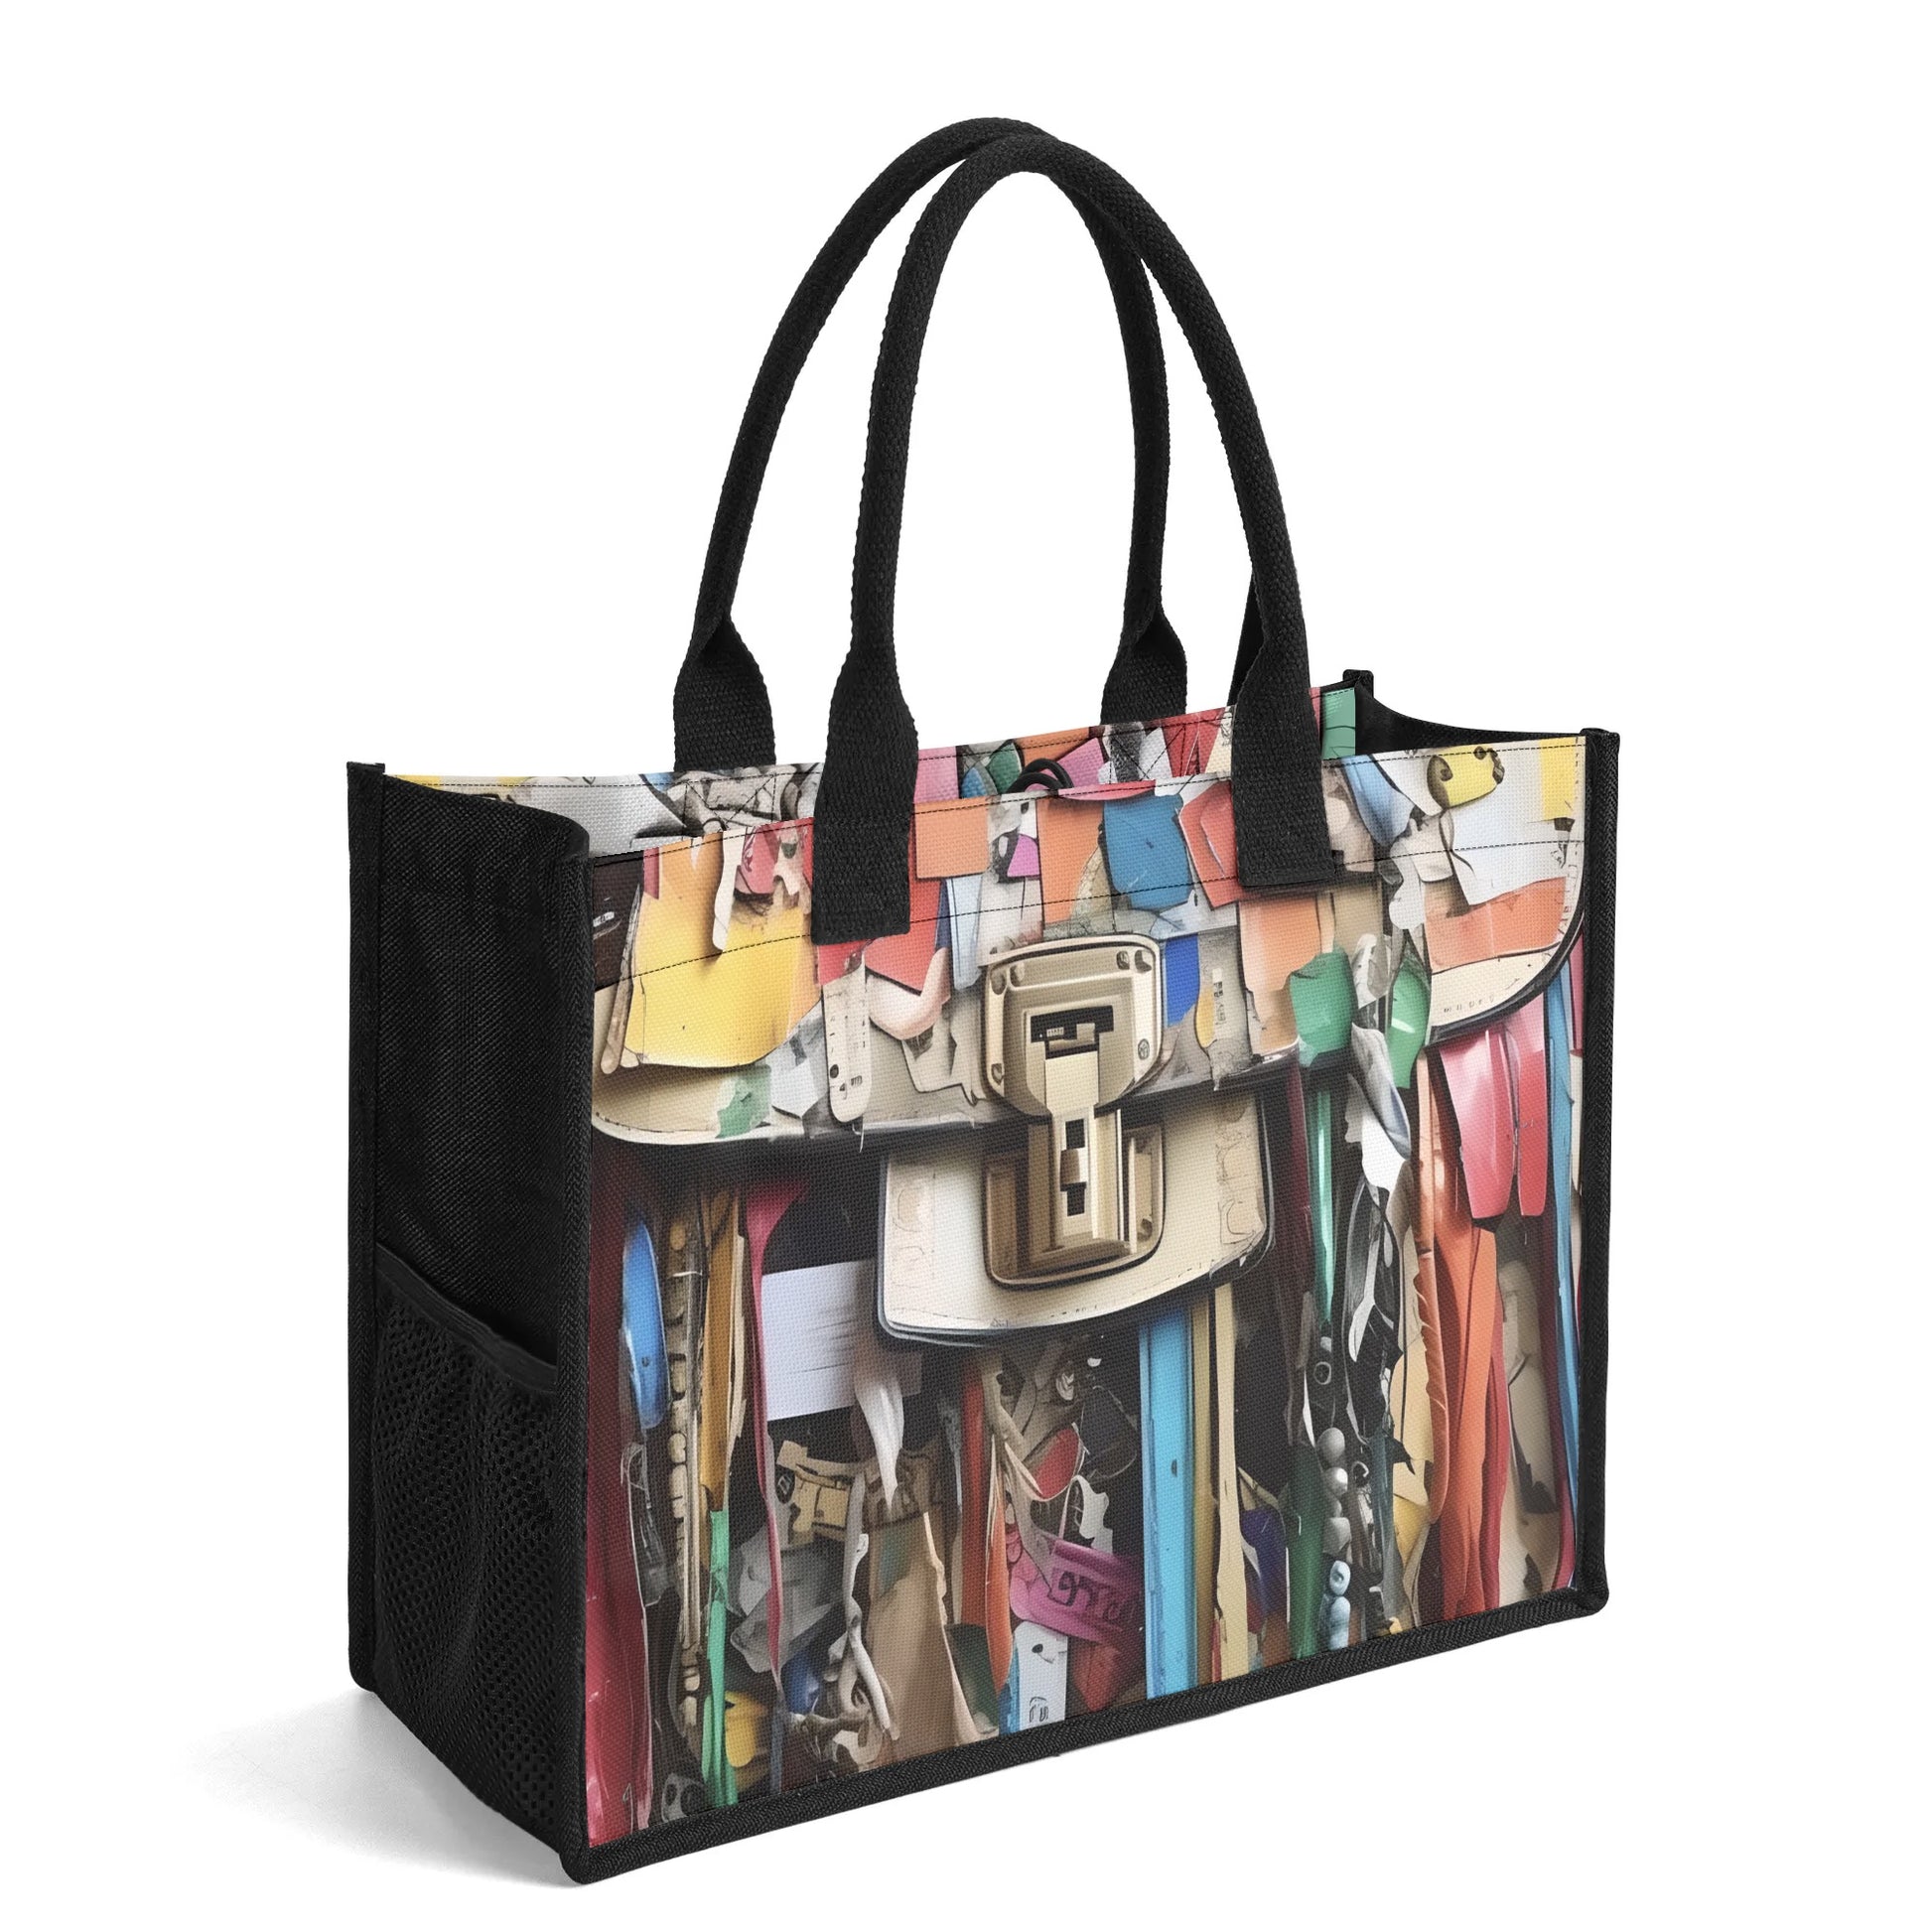 Certified ShitHot Steampunk "The Patched" Tote Bag - #theshithotcompany